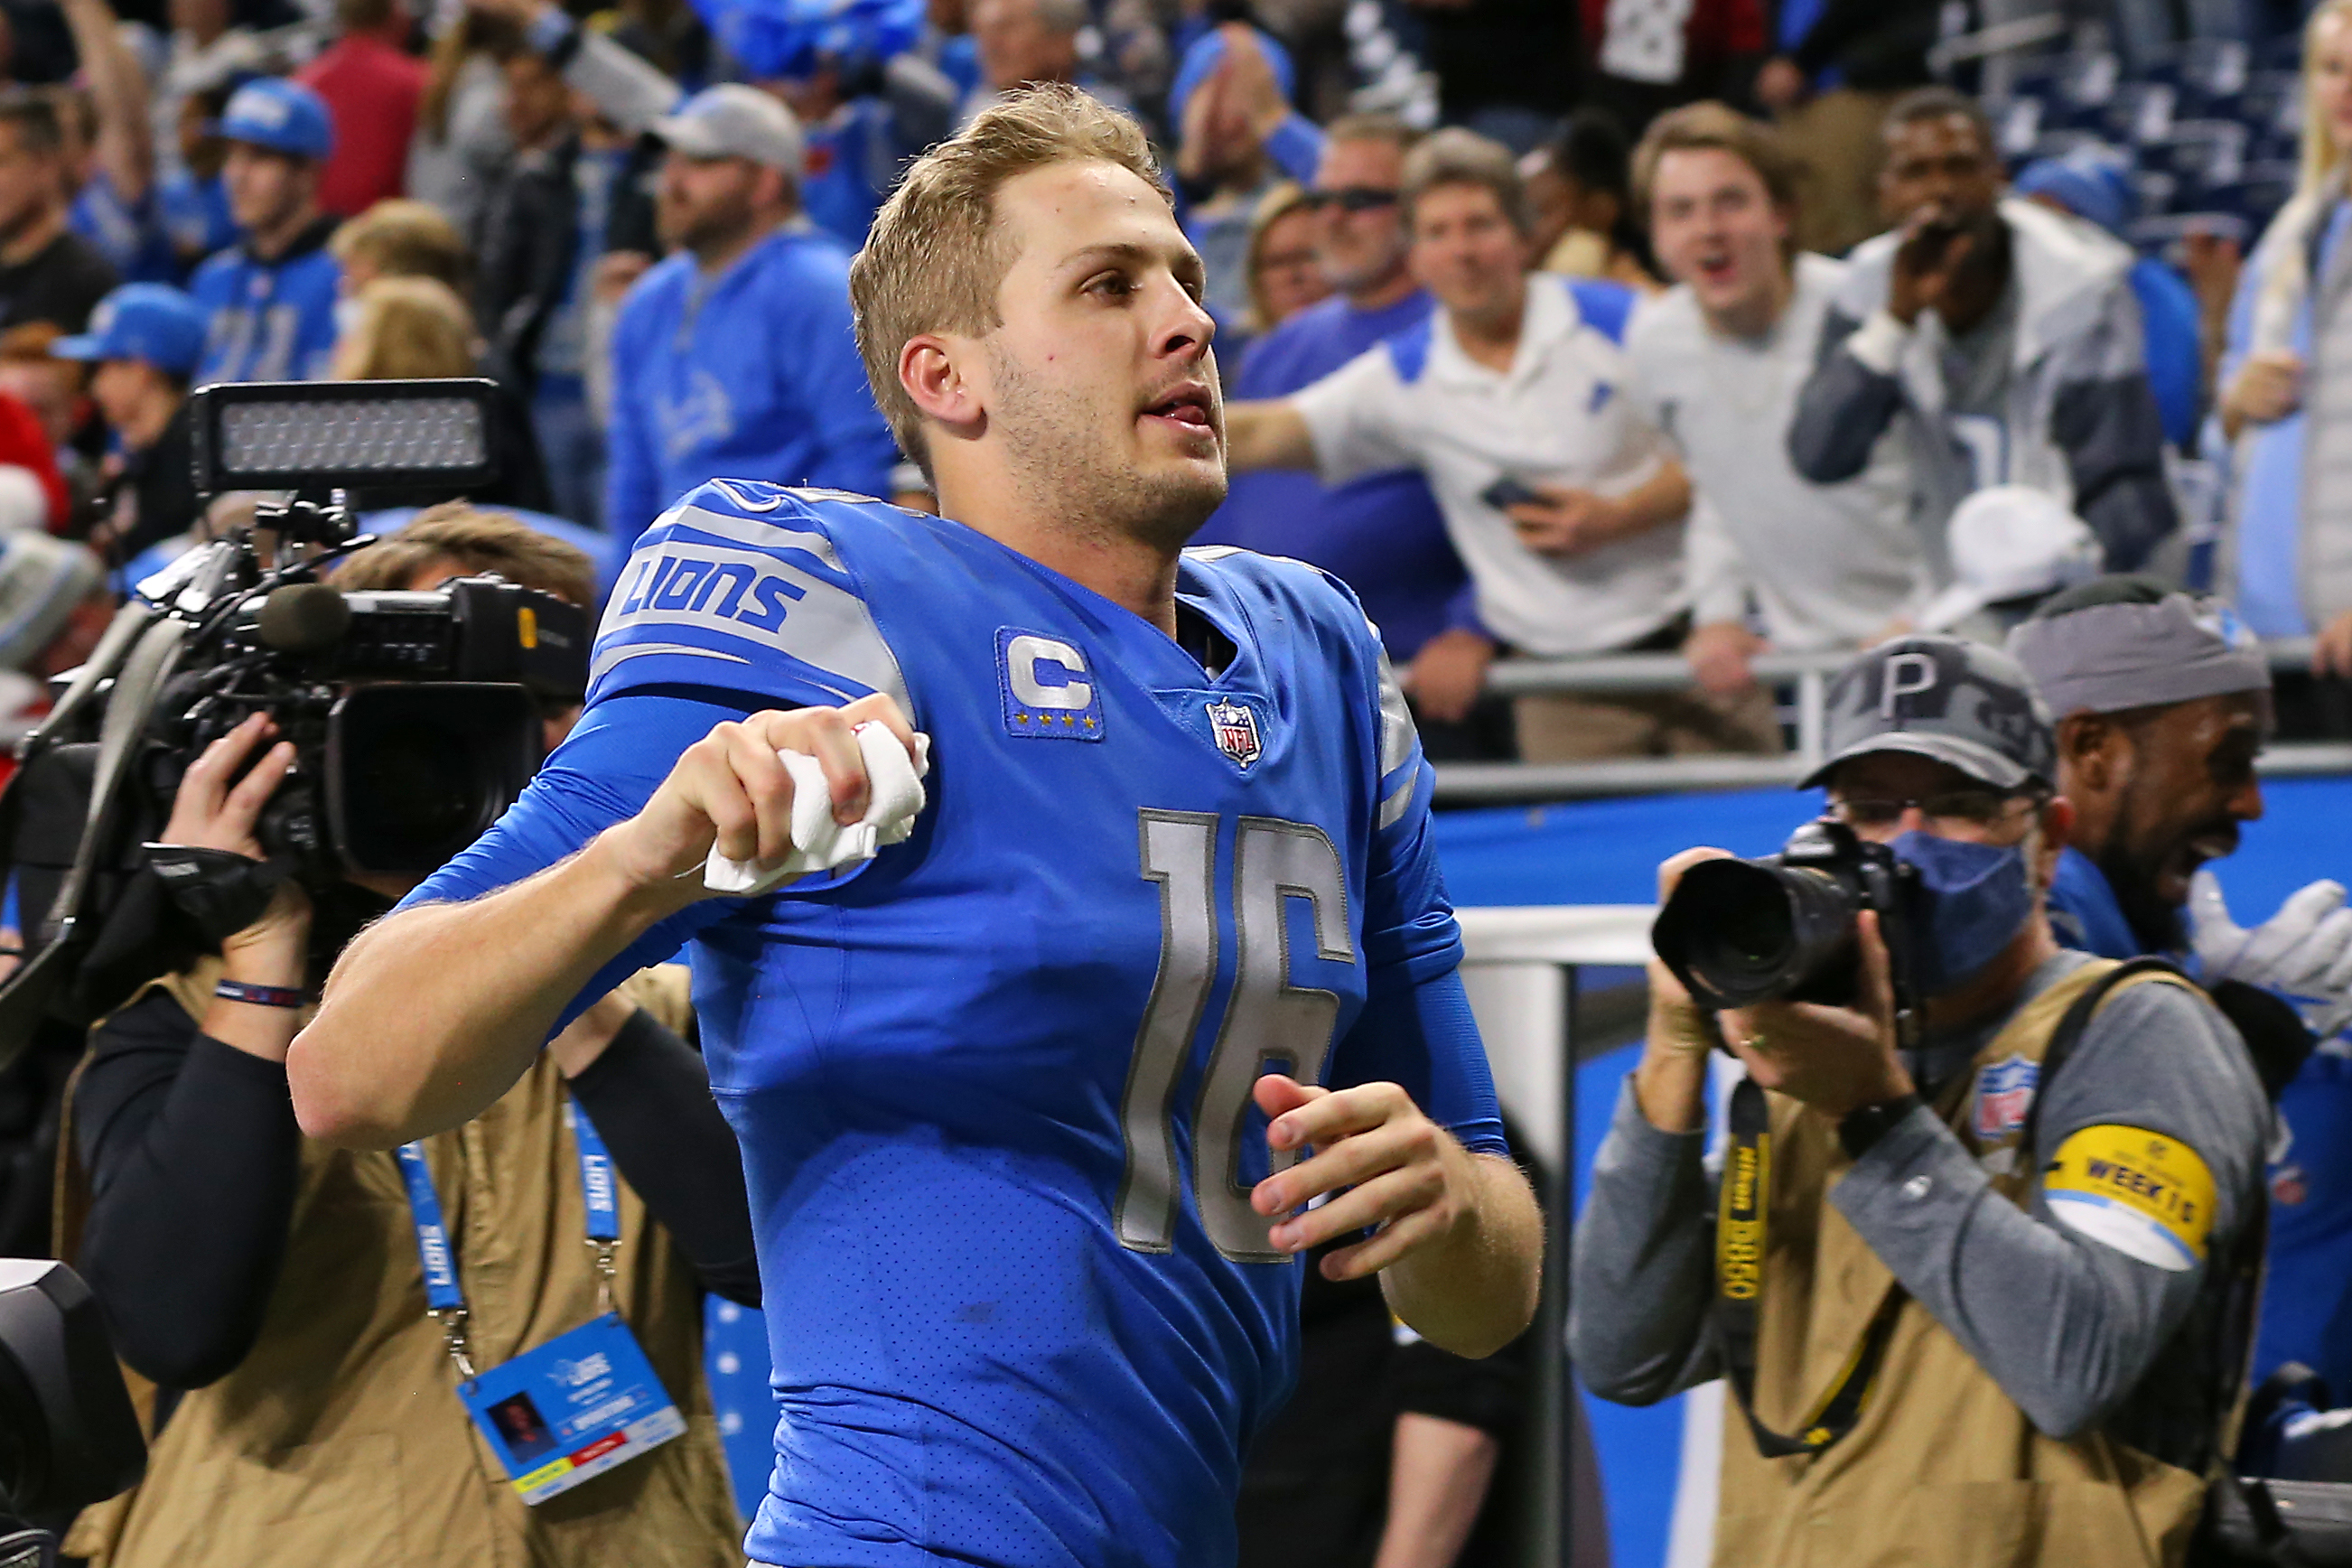 Jared Goff leads the Detroit Lions to the upset over Arizona